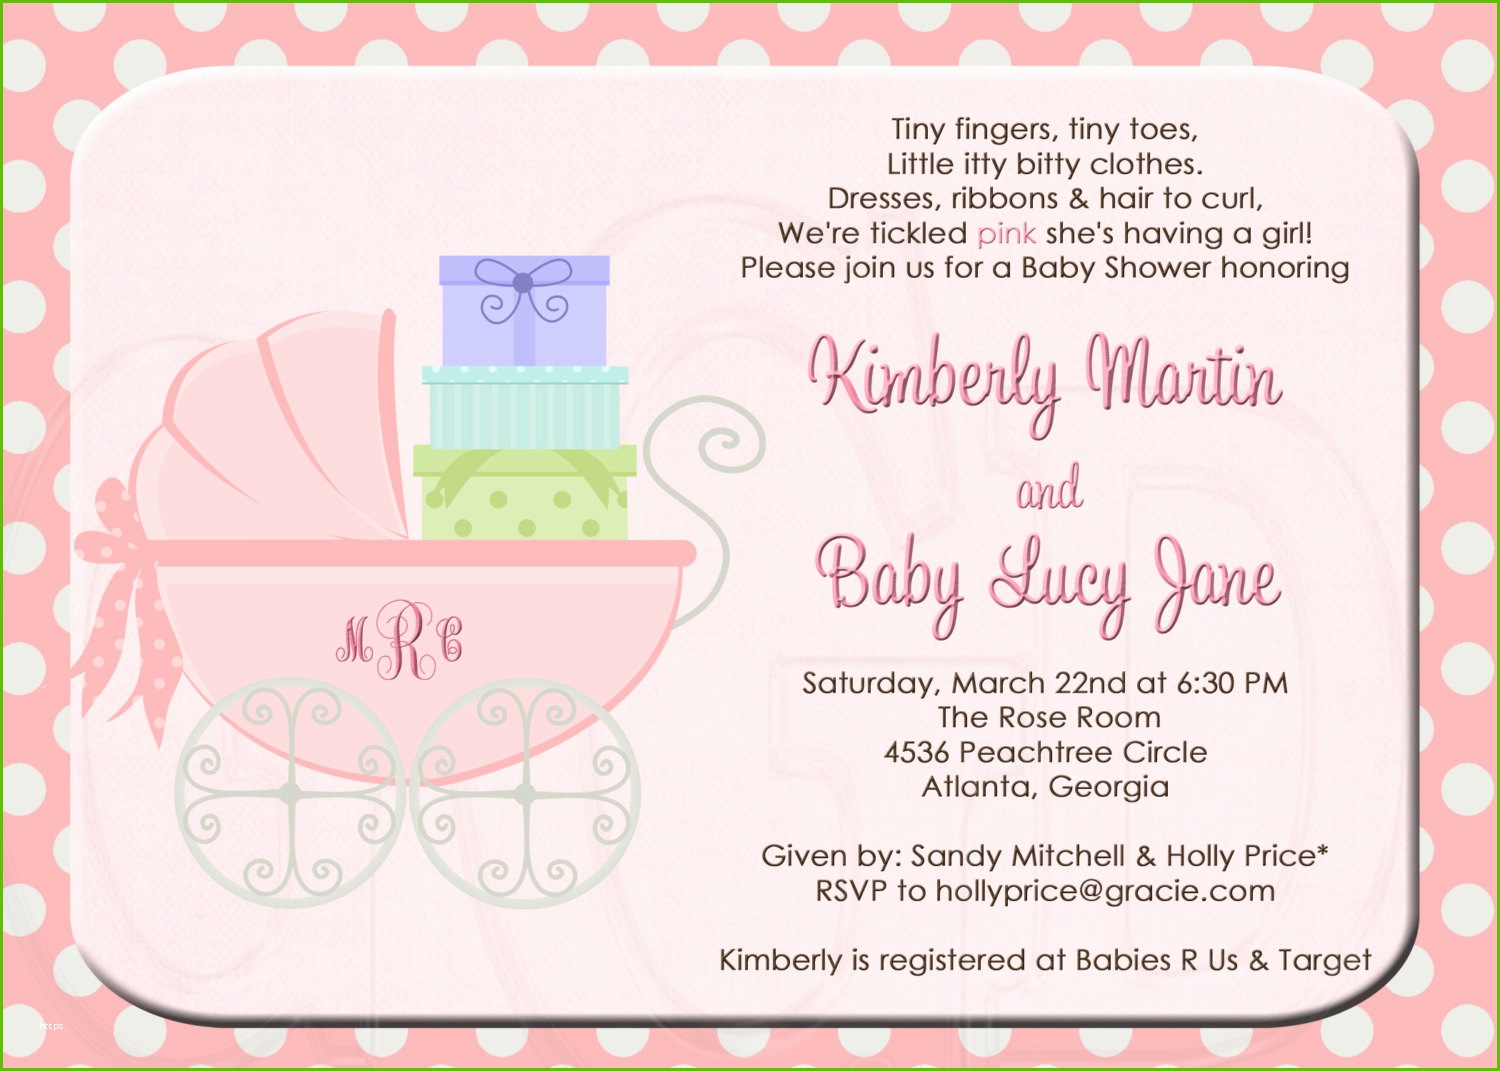 Full Size of Baby Shower:delightful Baby Shower Invitation Wording Picture Designs Baby Shower Invitation Wording Funny Baby Shower Invitation Wording Beautiful Baby Shower Funny Baby Shower Invitation Wording Beautiful Baby Shower Invitation Wording Ideas